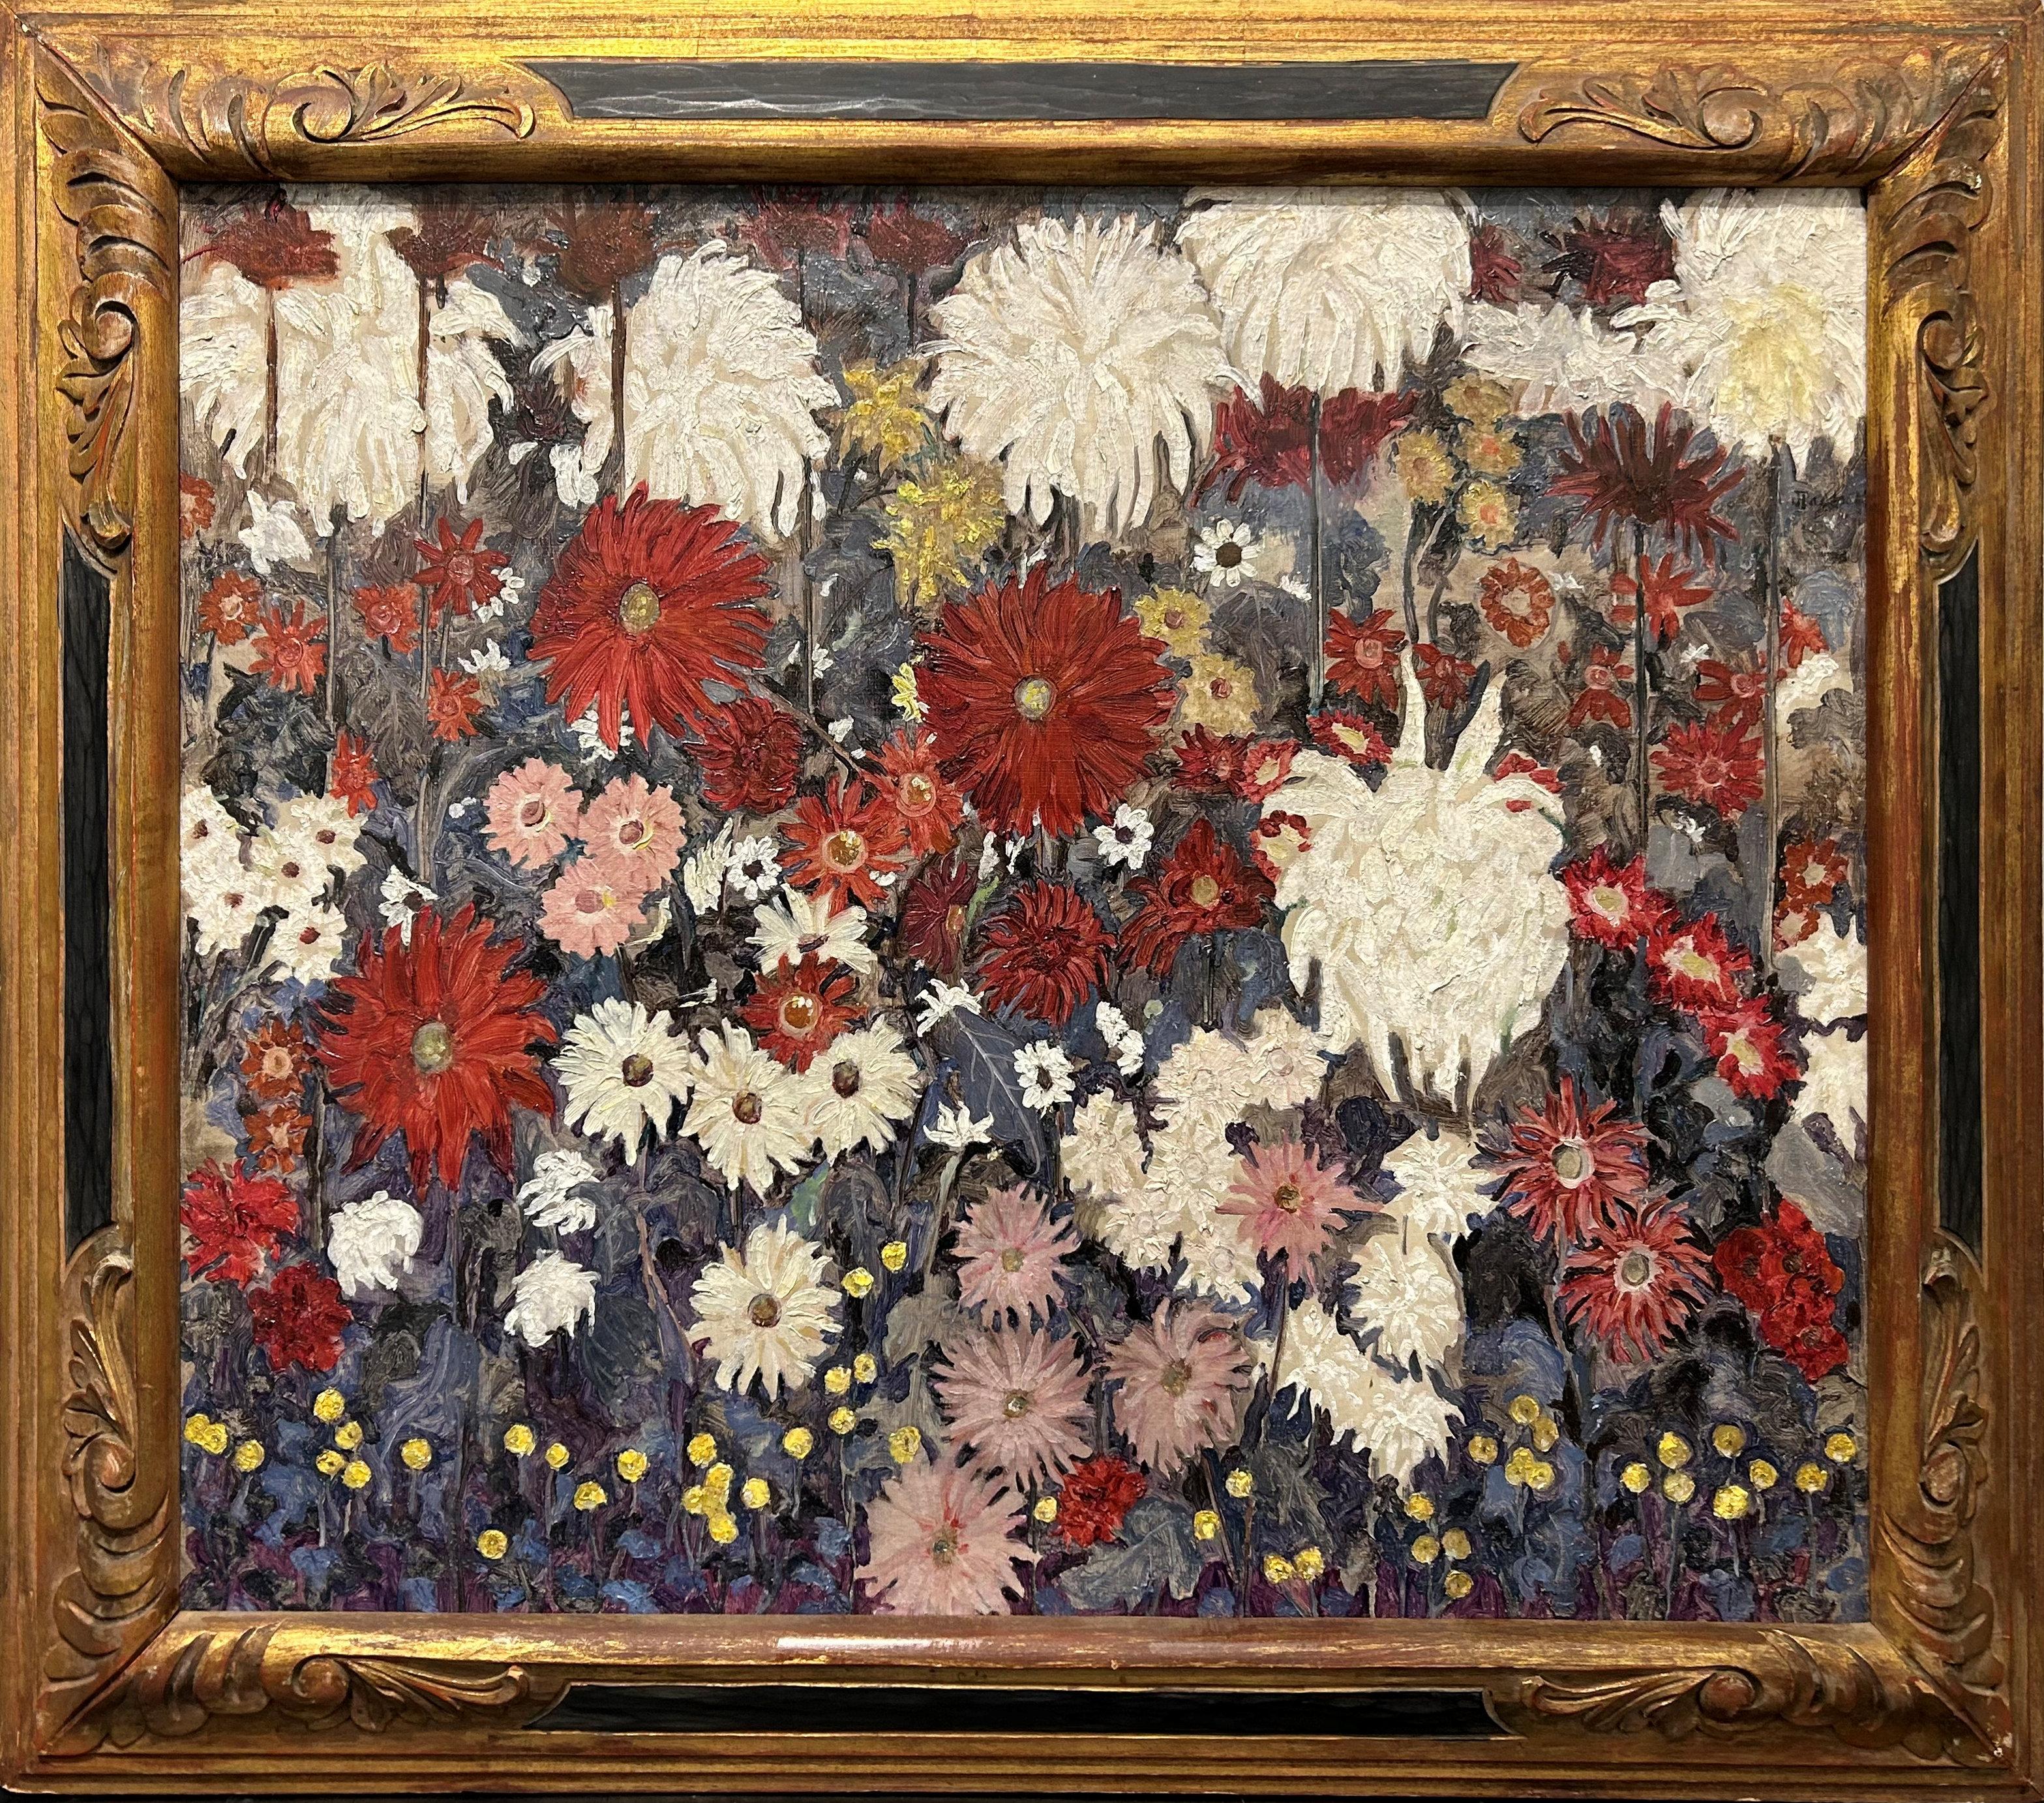 Josephine Paddock
Chrysanthemum Panel
Signed on the reverse
Oil on canvas
25 x 30 inches

Provenance:
The artist
Fifteen Gallery, New York
Private Collection
Melanie Kern-Favilla

Exhibited:
New York, Fifteen Gallery, Josephine Paddock,